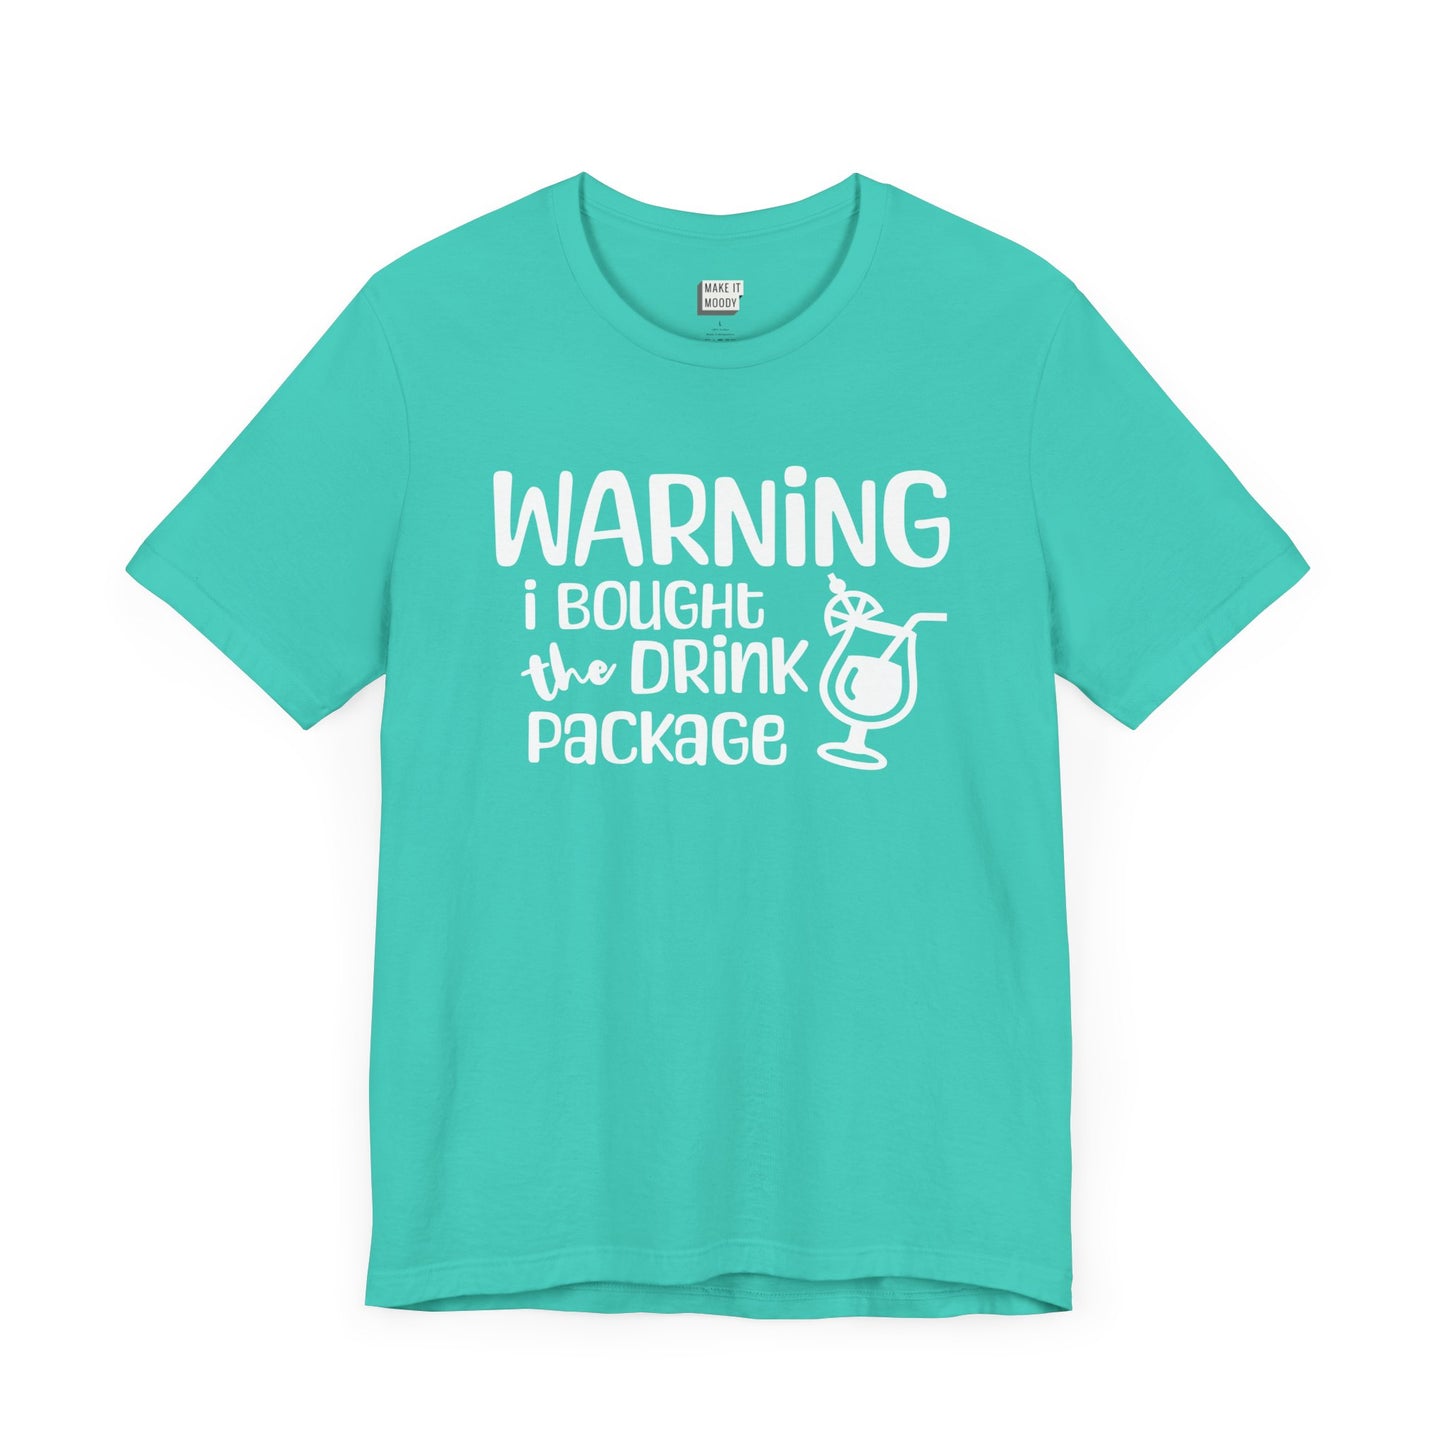 "Warning: I Bought The Drink Package" Drinking Tee